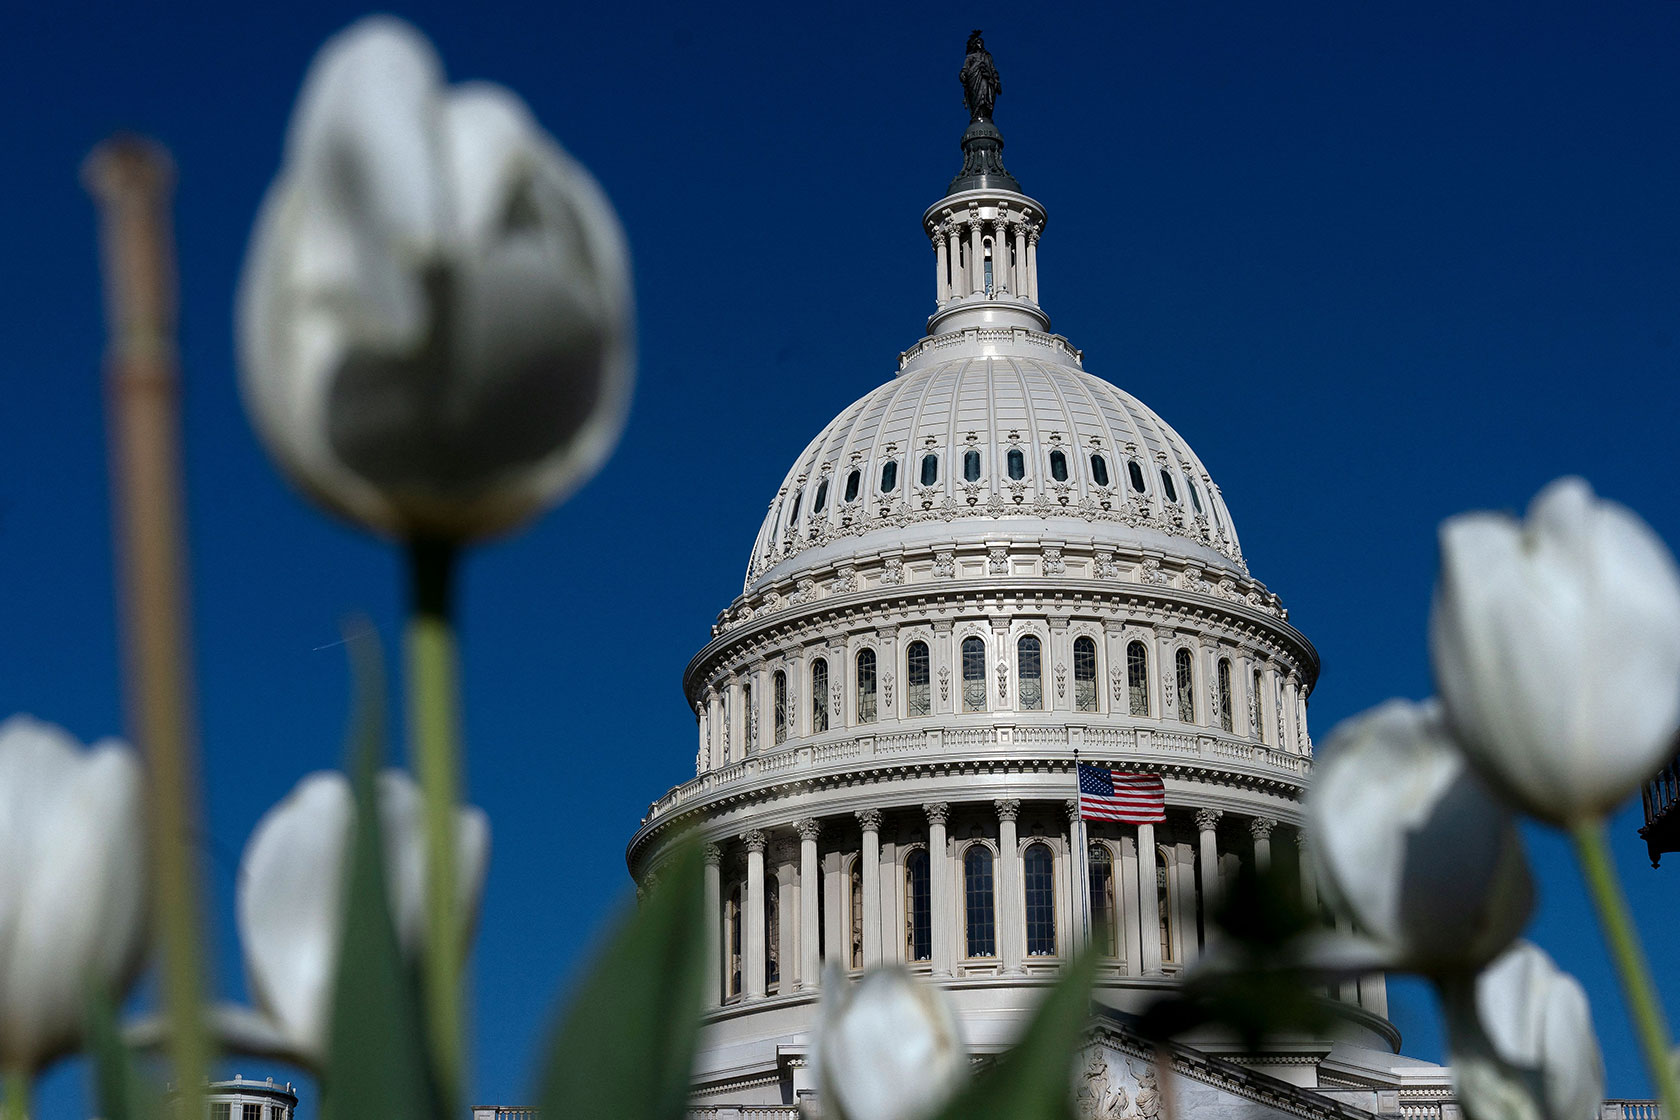 Flowers are seen in front of the U.S. Capitol.